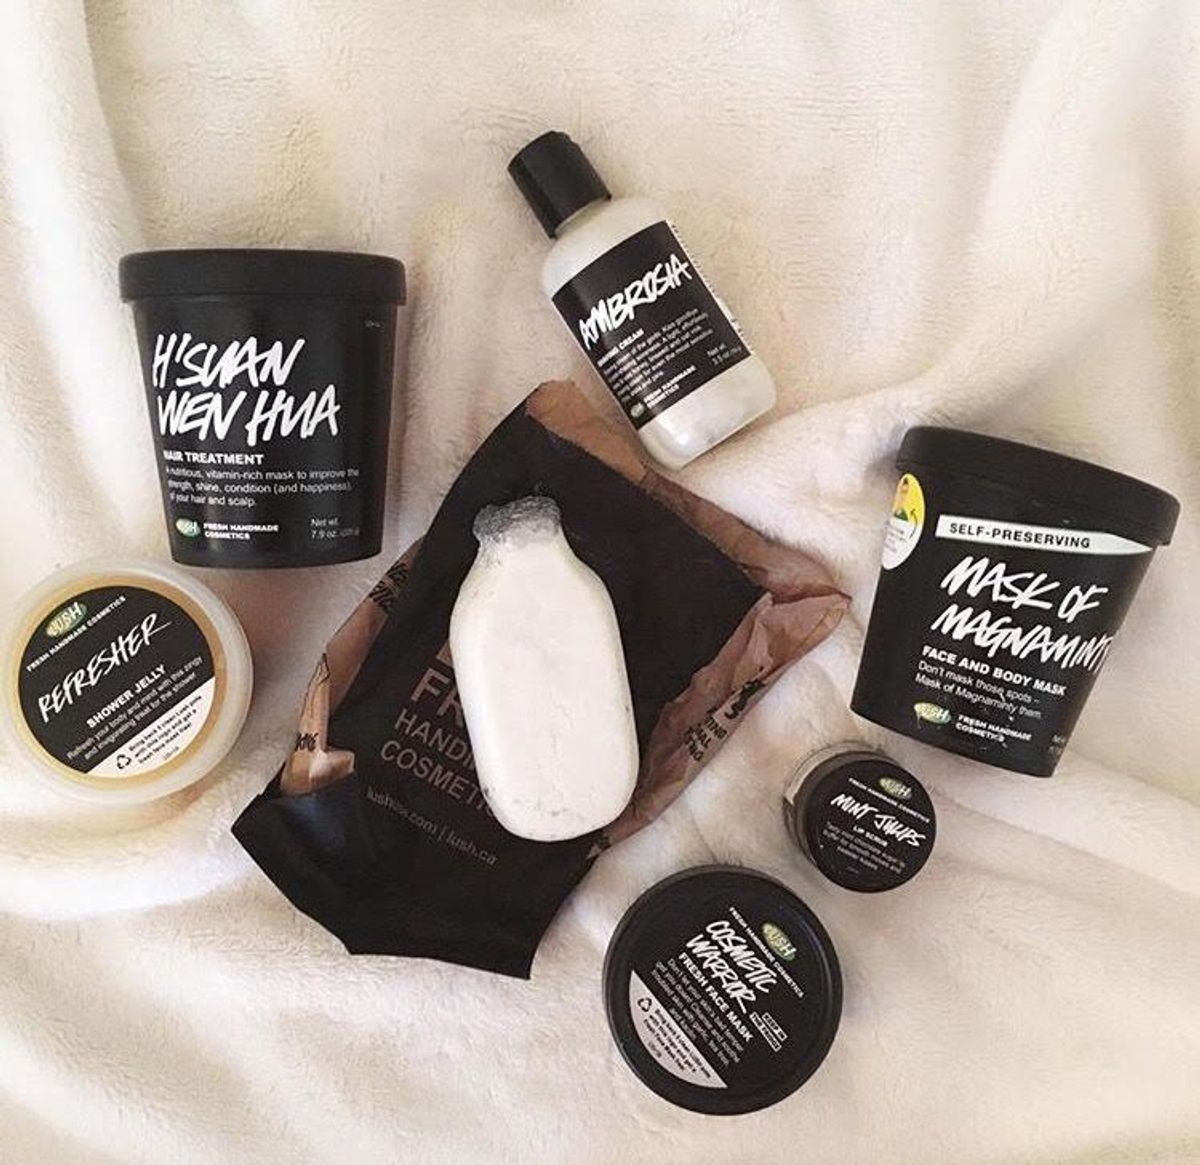 7 LUSH Products You Should Totally Splurge On